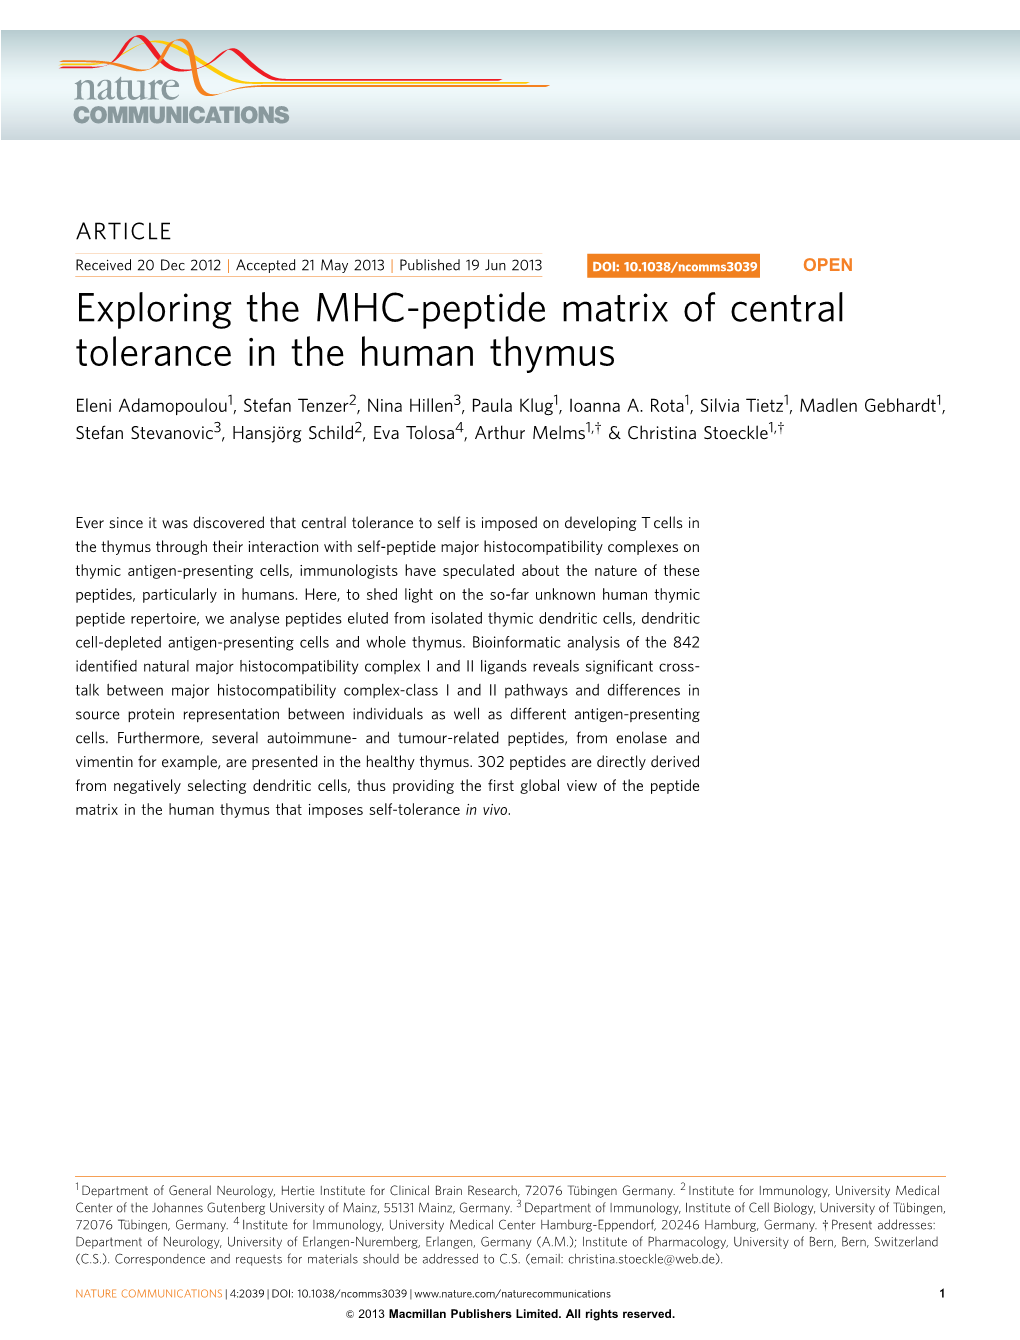 Exploring the MHC-Peptide Matrix of Central Tolerance in the Human Thymus